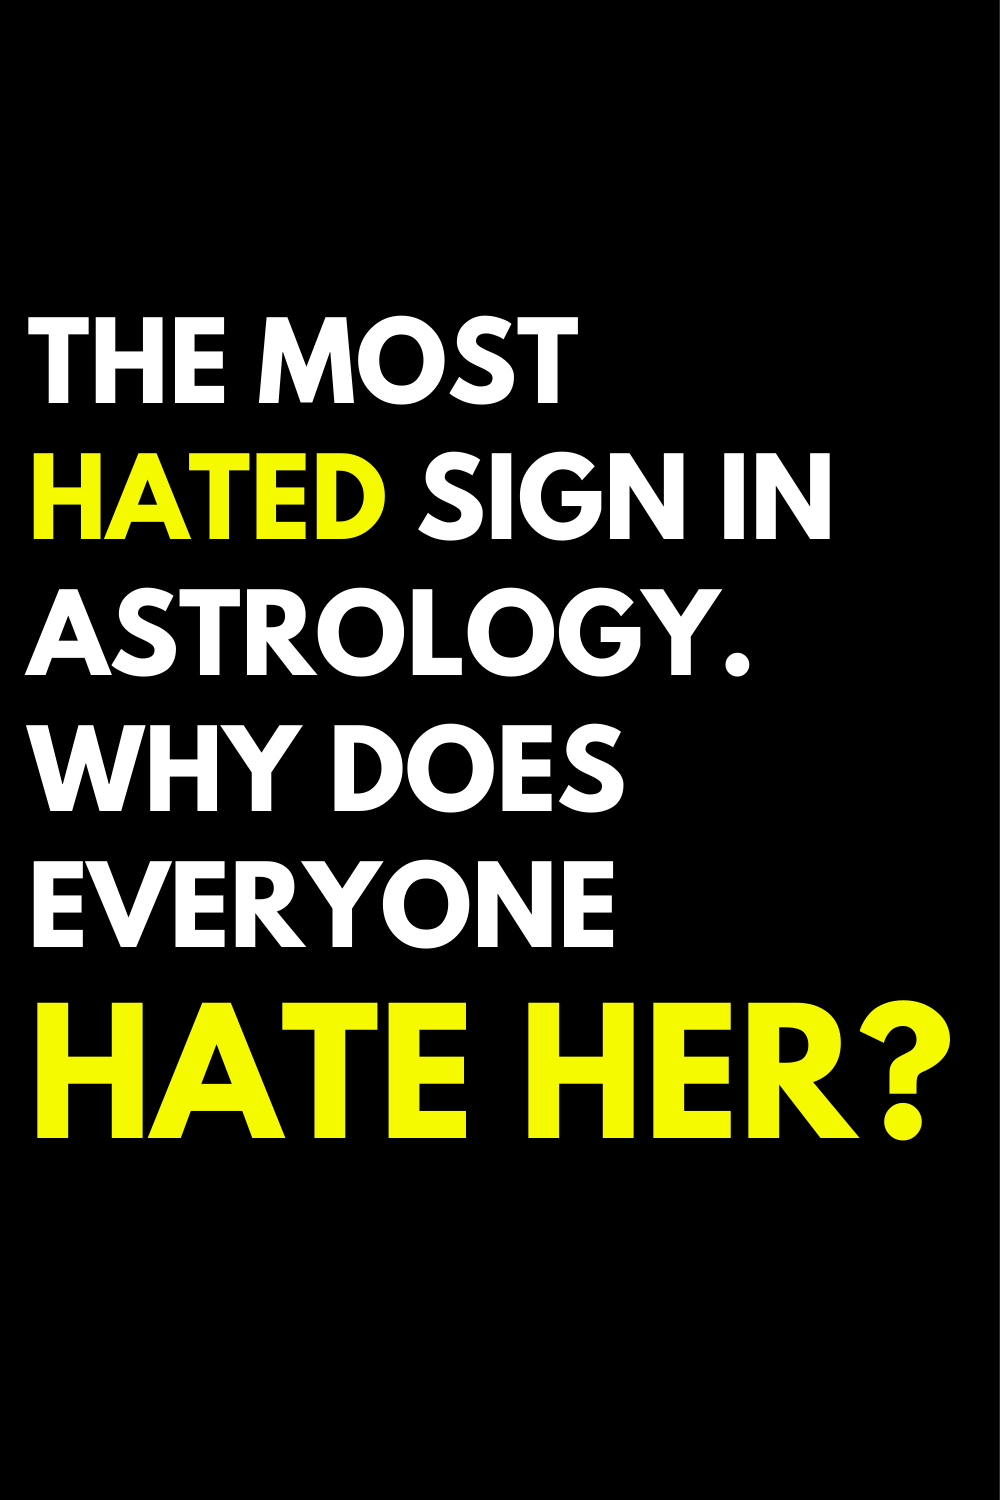 The most hated sign in astrology. Why does everyone hate her?